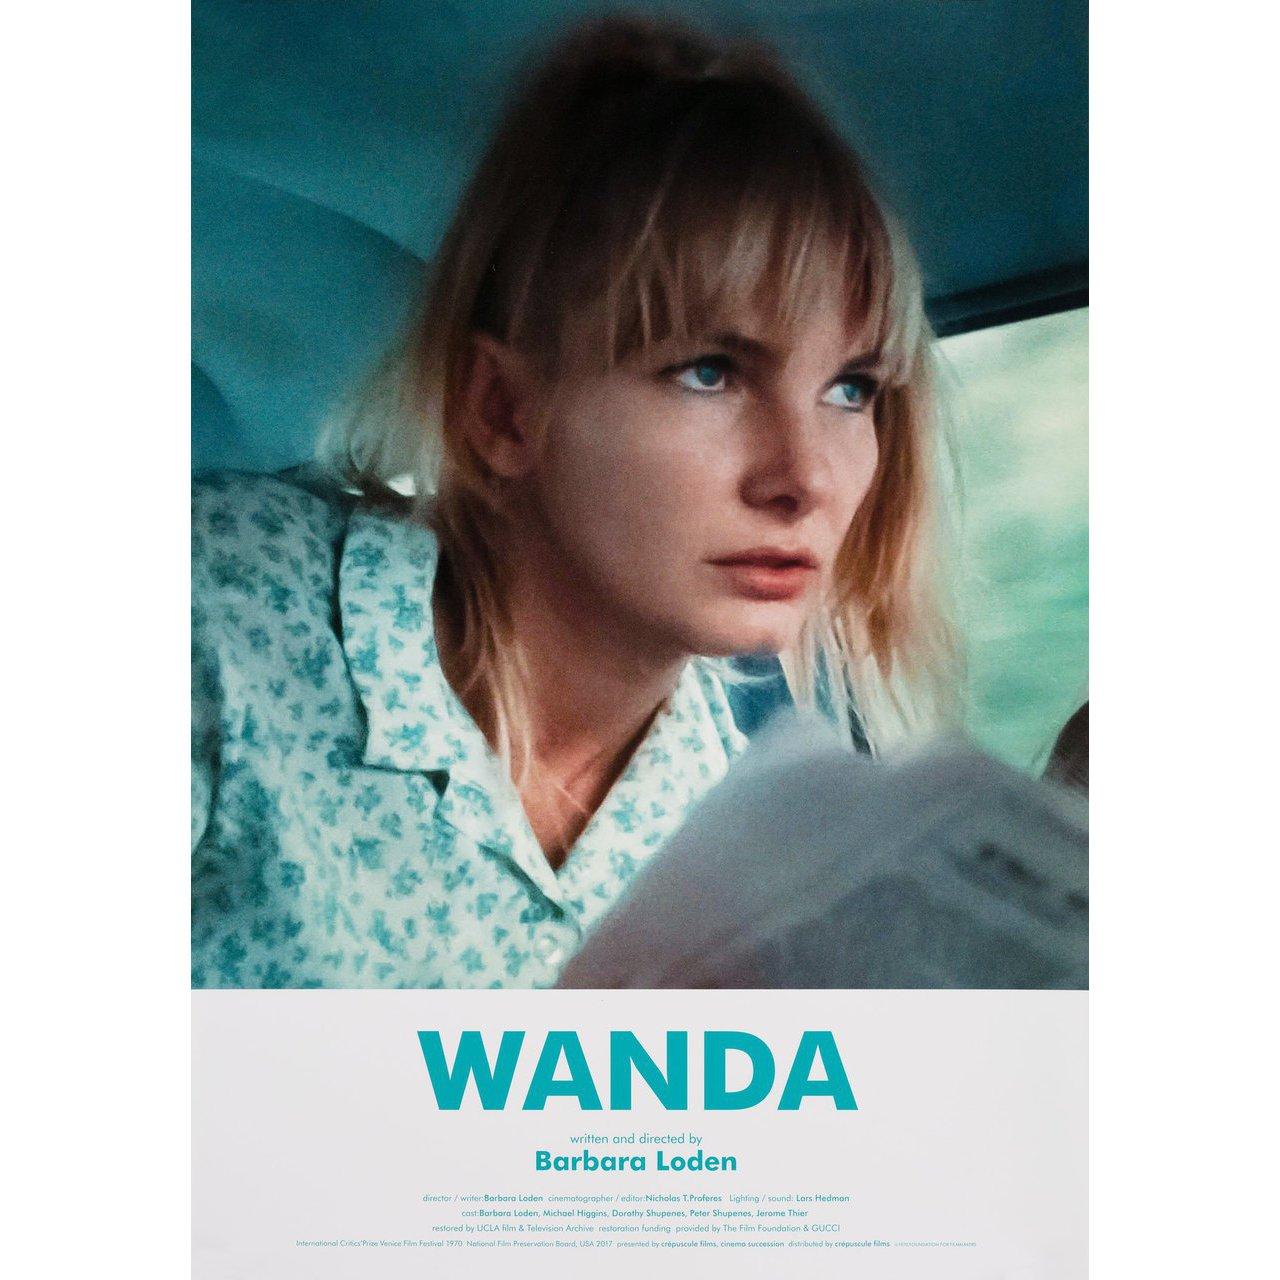 Original 2022 Japanese B3 poster for the 1970 film Wanda directed by Barbara Loden with Barbara Loden / Michael Higgins / Dorothy Shupenes / Peter Shupenes. Very Good-Fine condition, rolled. Please note: the size is stated in inches and the actual